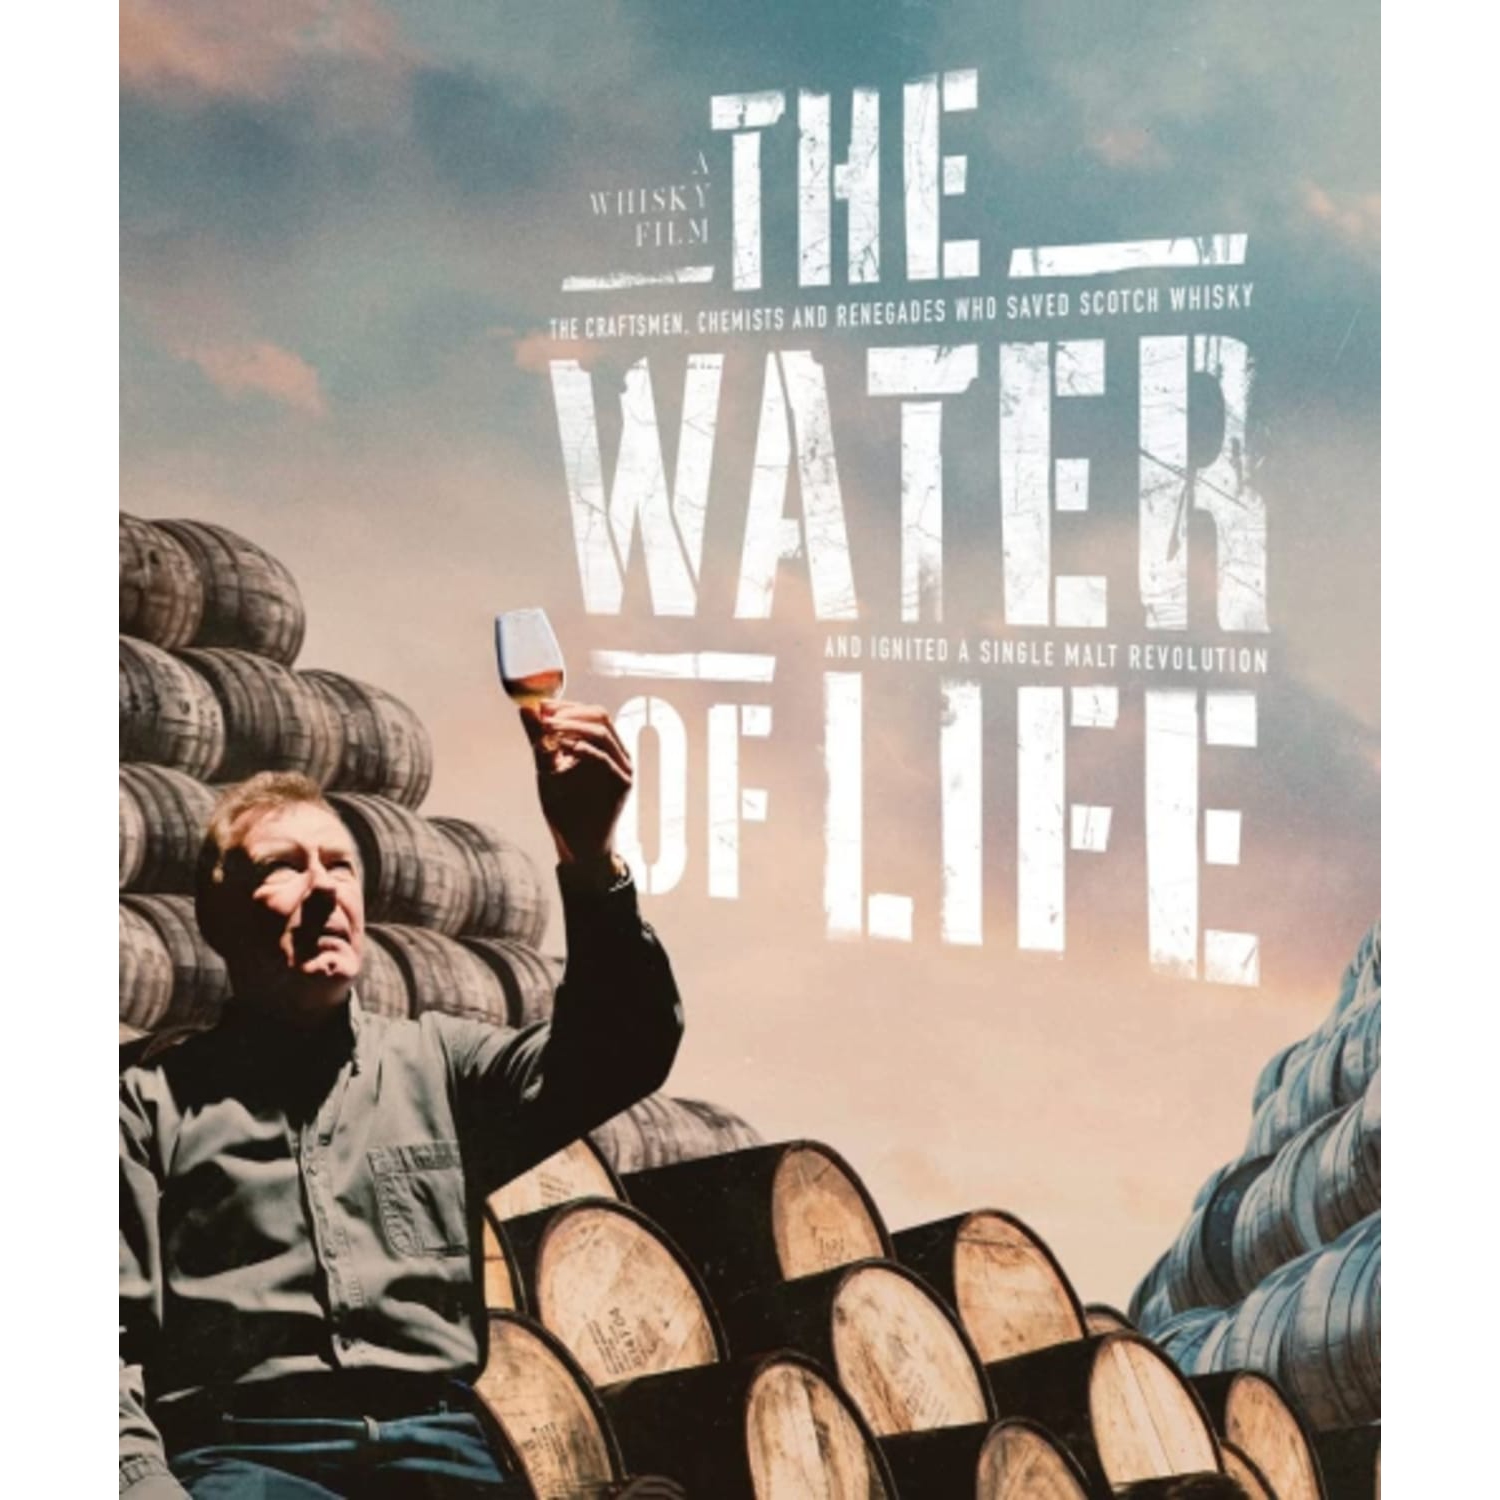 The Water of Life: A Whisky Film (Blu-ray)